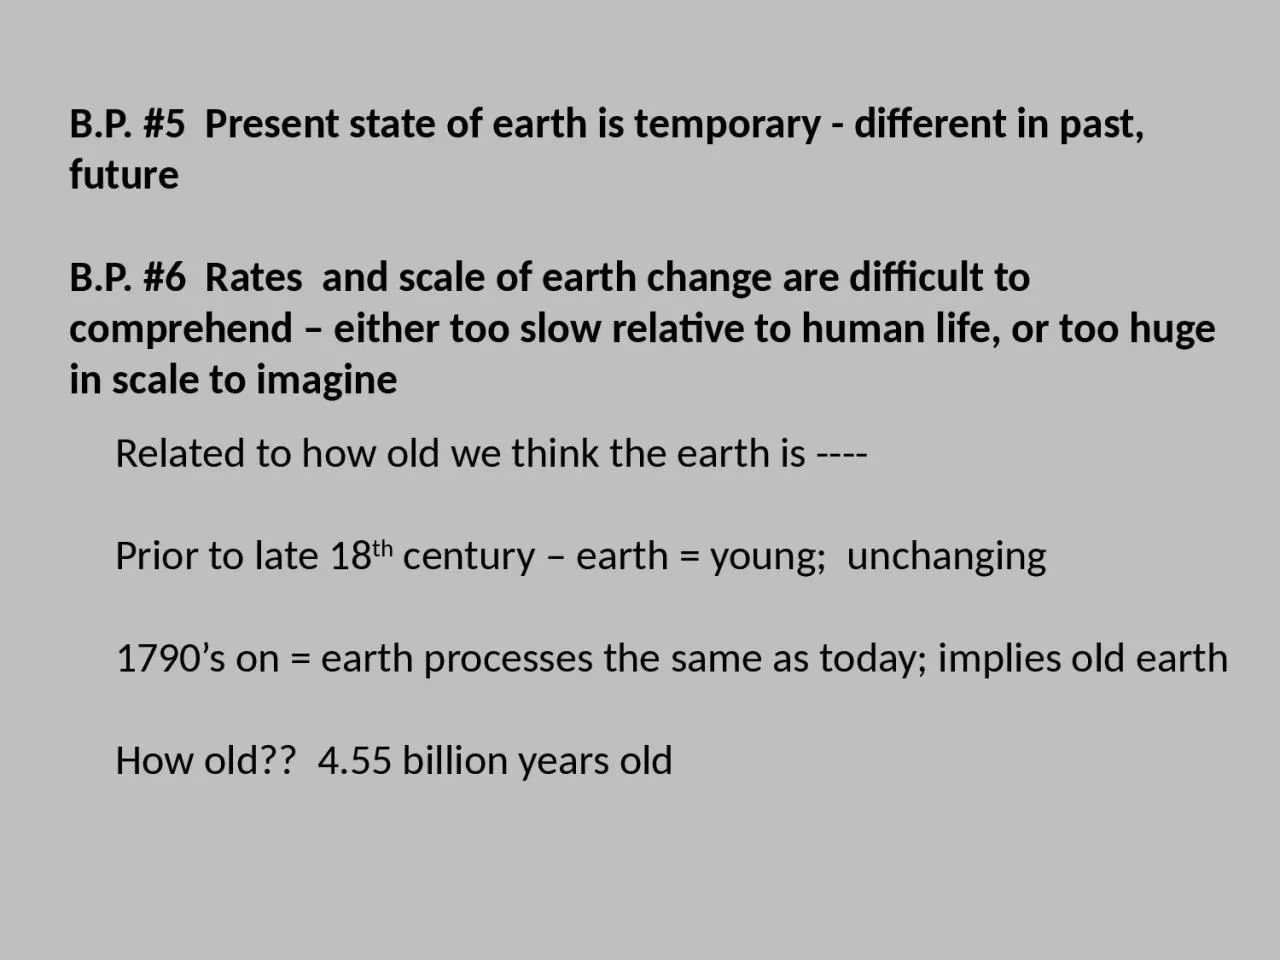 B.P. #5  Present state of earth is temporary - different in past, future